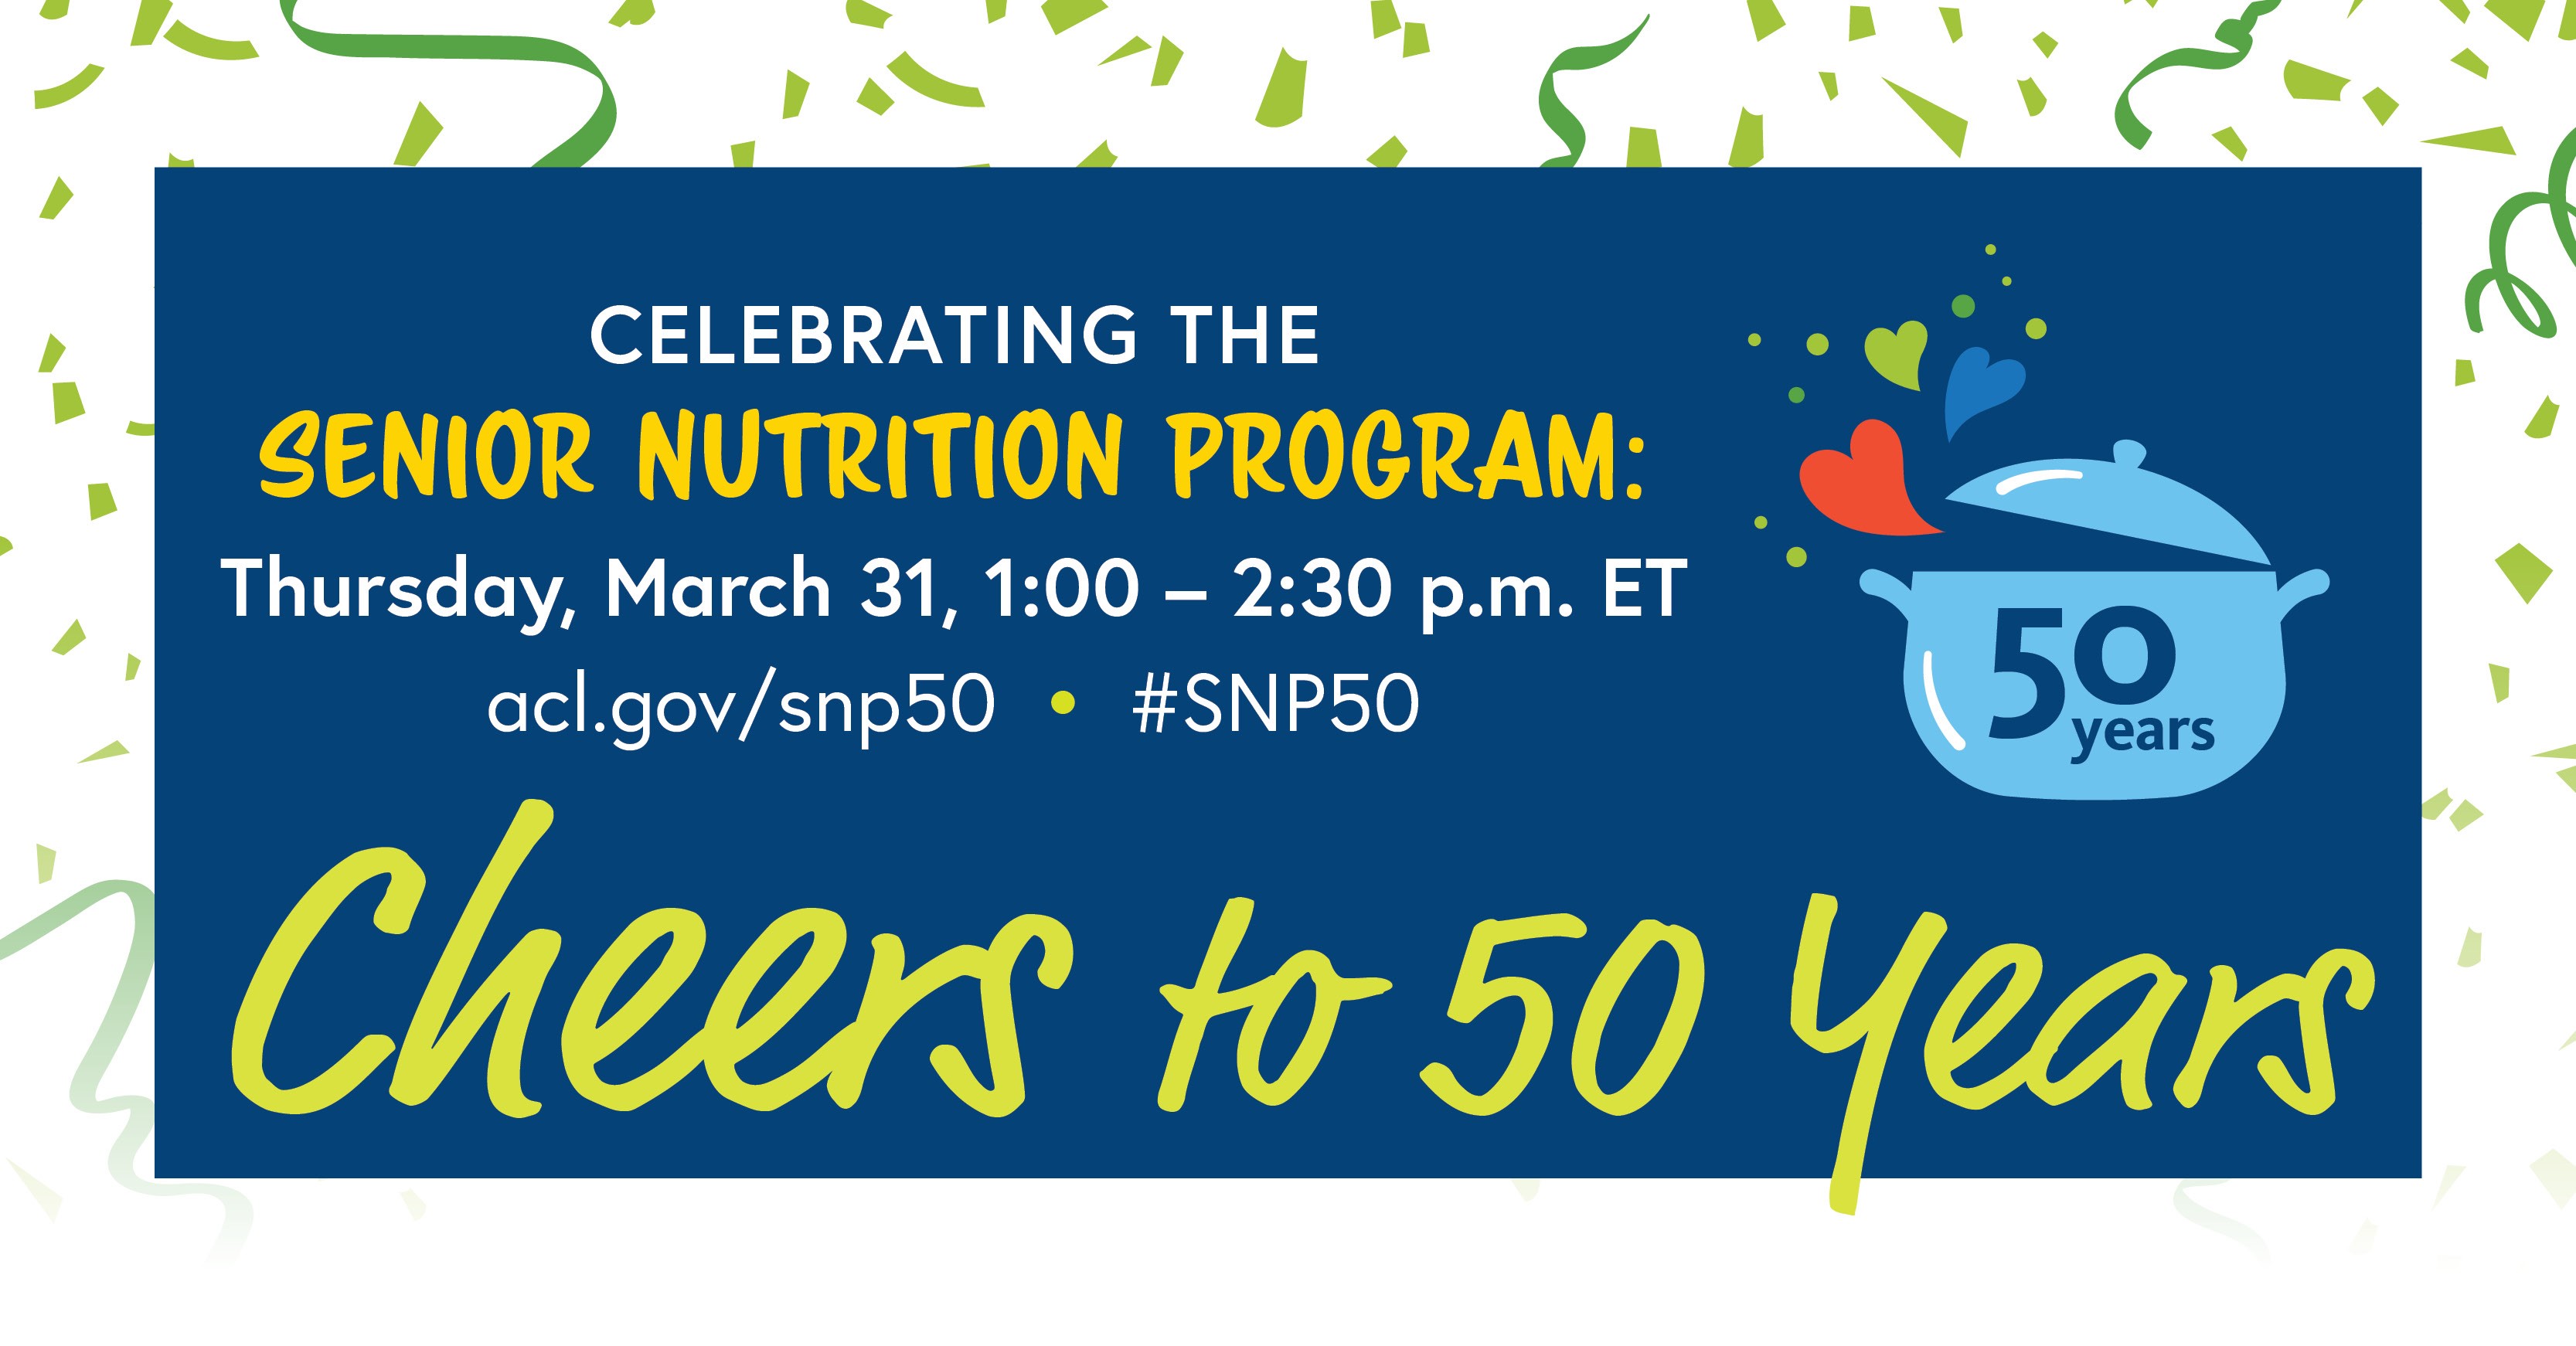 Celebrating the Senior Nutrition Program: Thursday, March 31, 1:00-2:30 PM ET. ACL.gov/SNP50 #SNP50 Cheers to 50 Years